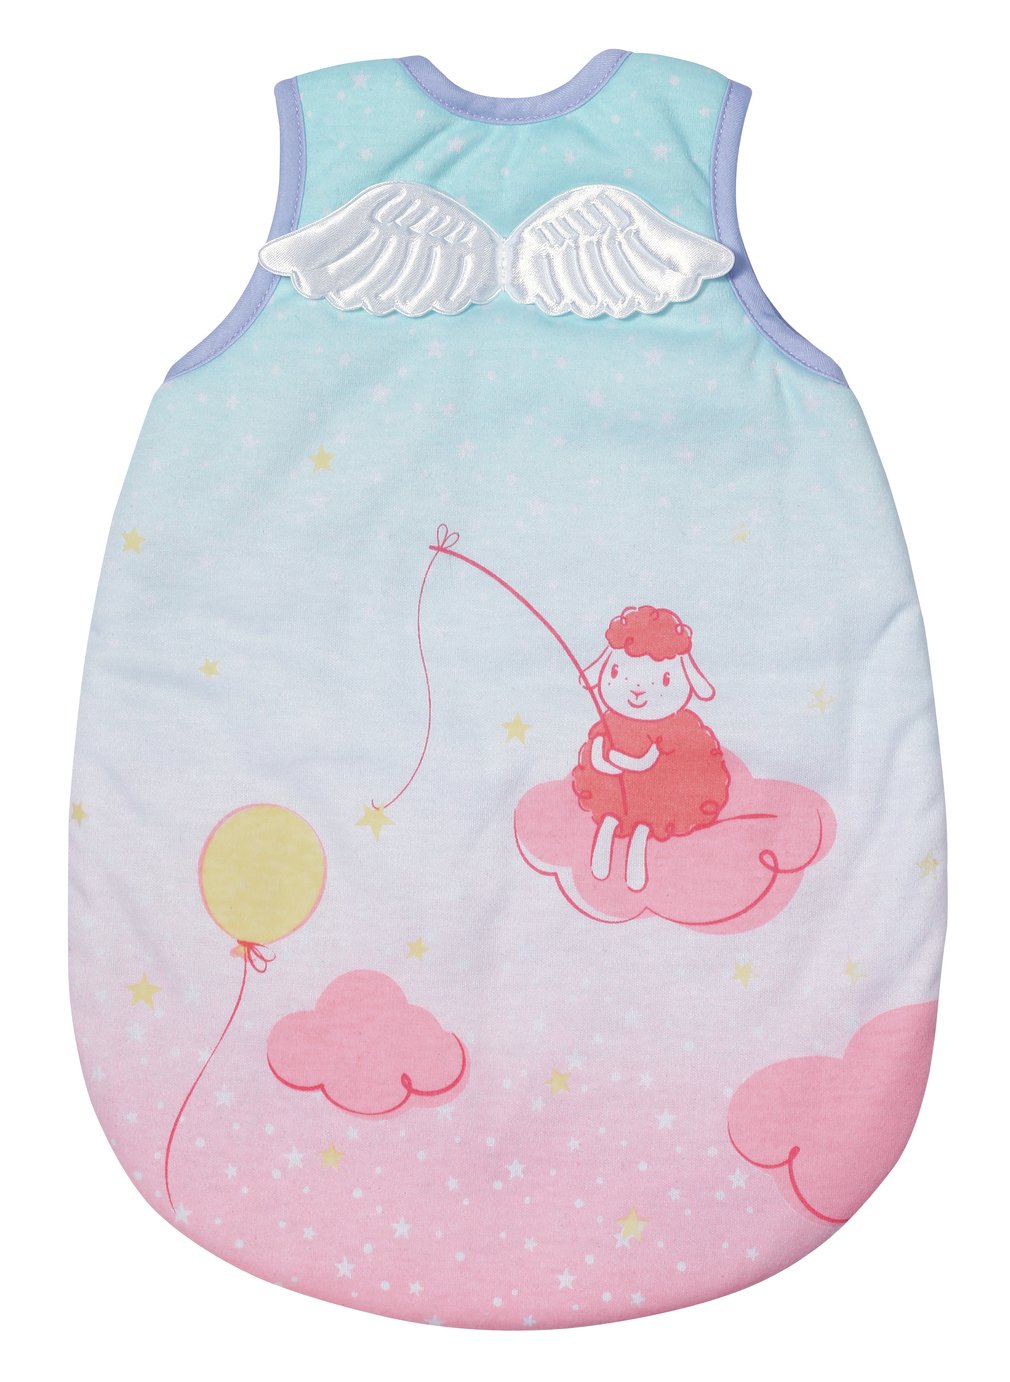 Baby Annabell Sweet Dreams Sleeping Bag Review